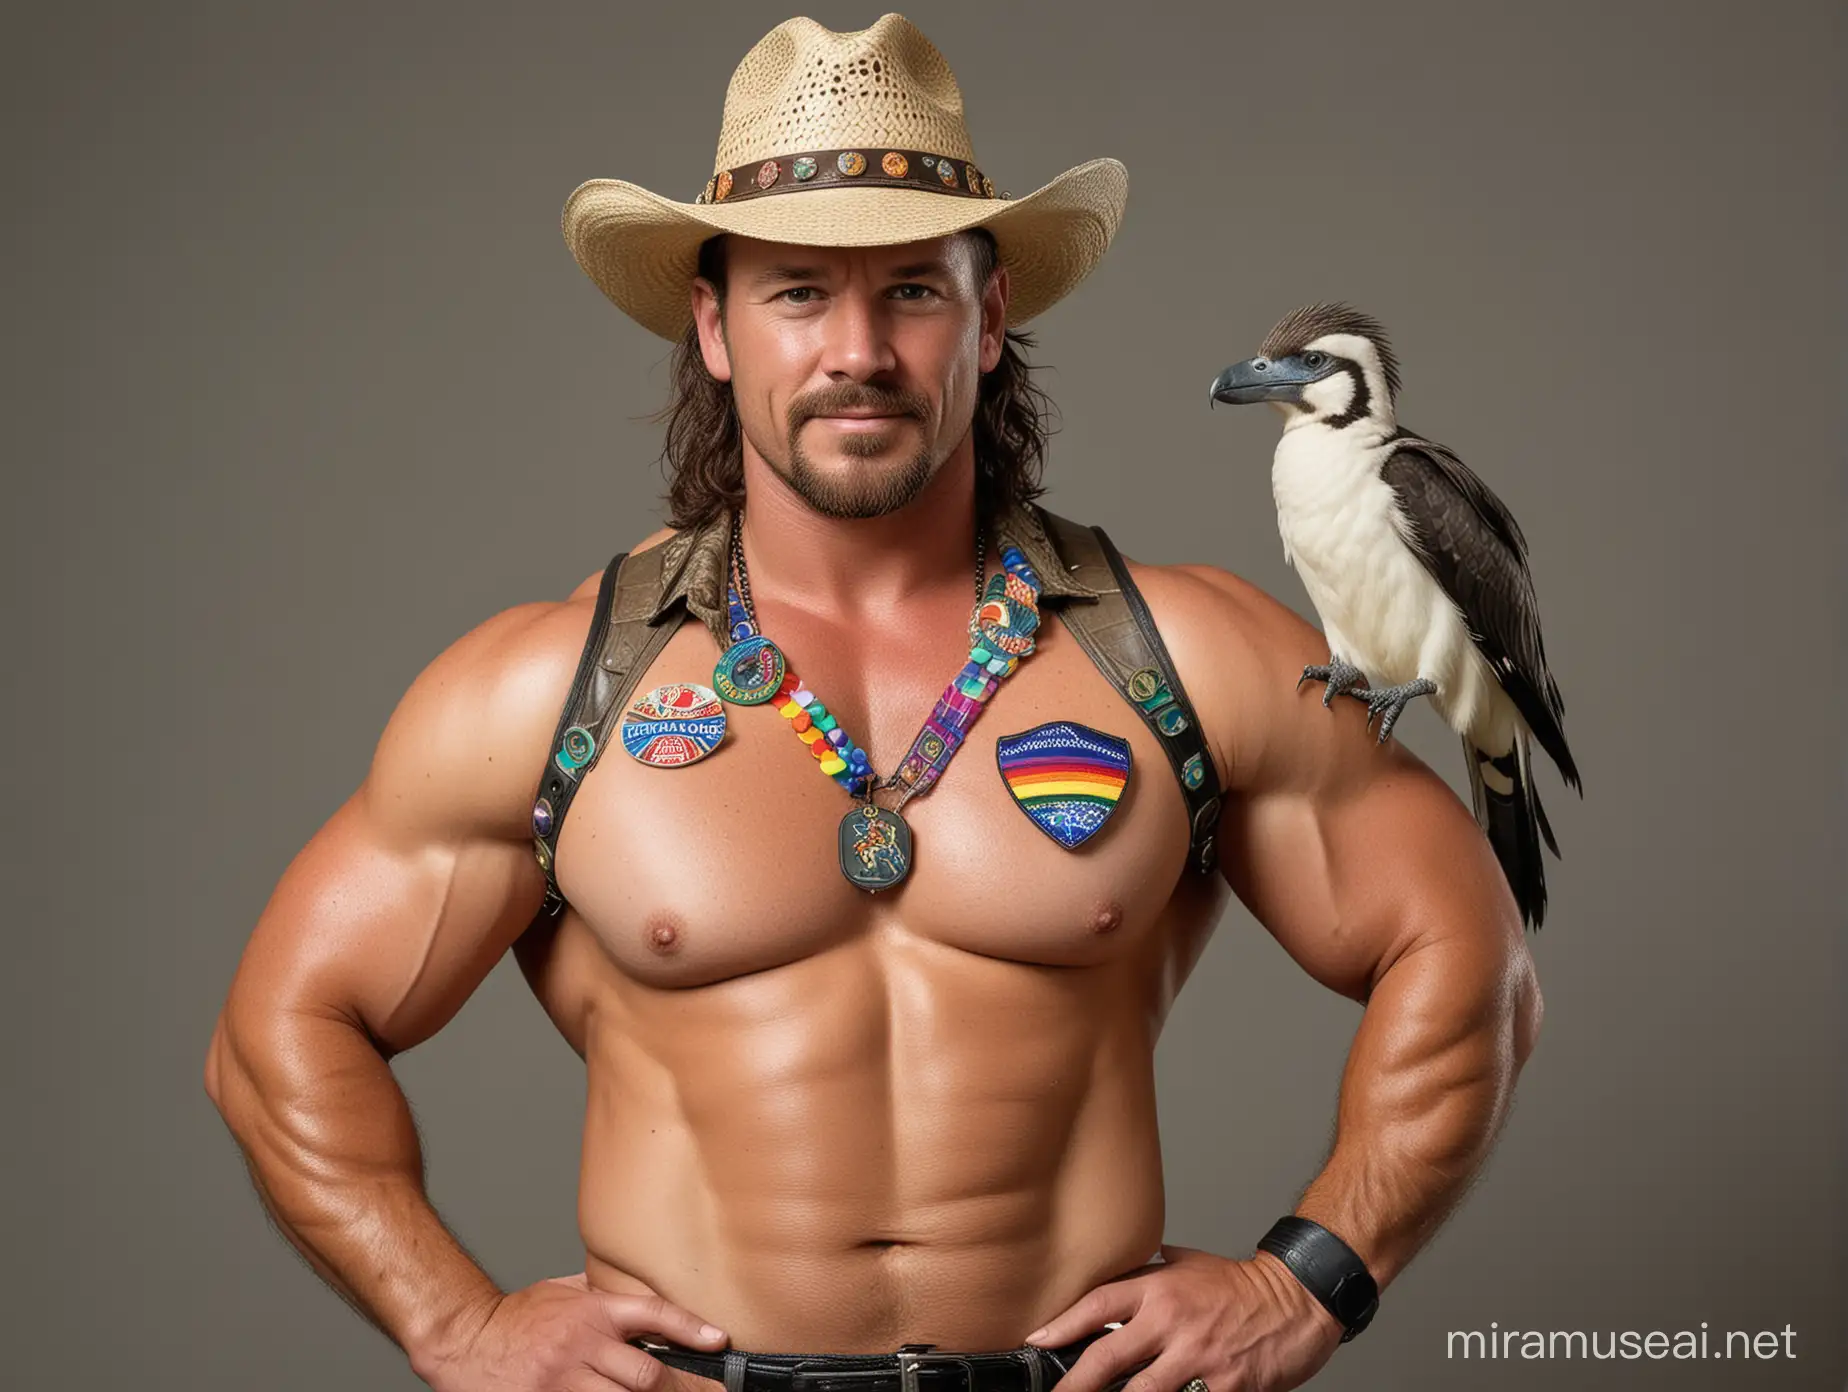 Big Strong Beefy Muscled World's strongest Australian man wearing unbuttoned crocodile dundee Outfit with Rainbow Badges and a Kookaburra on his shoulder